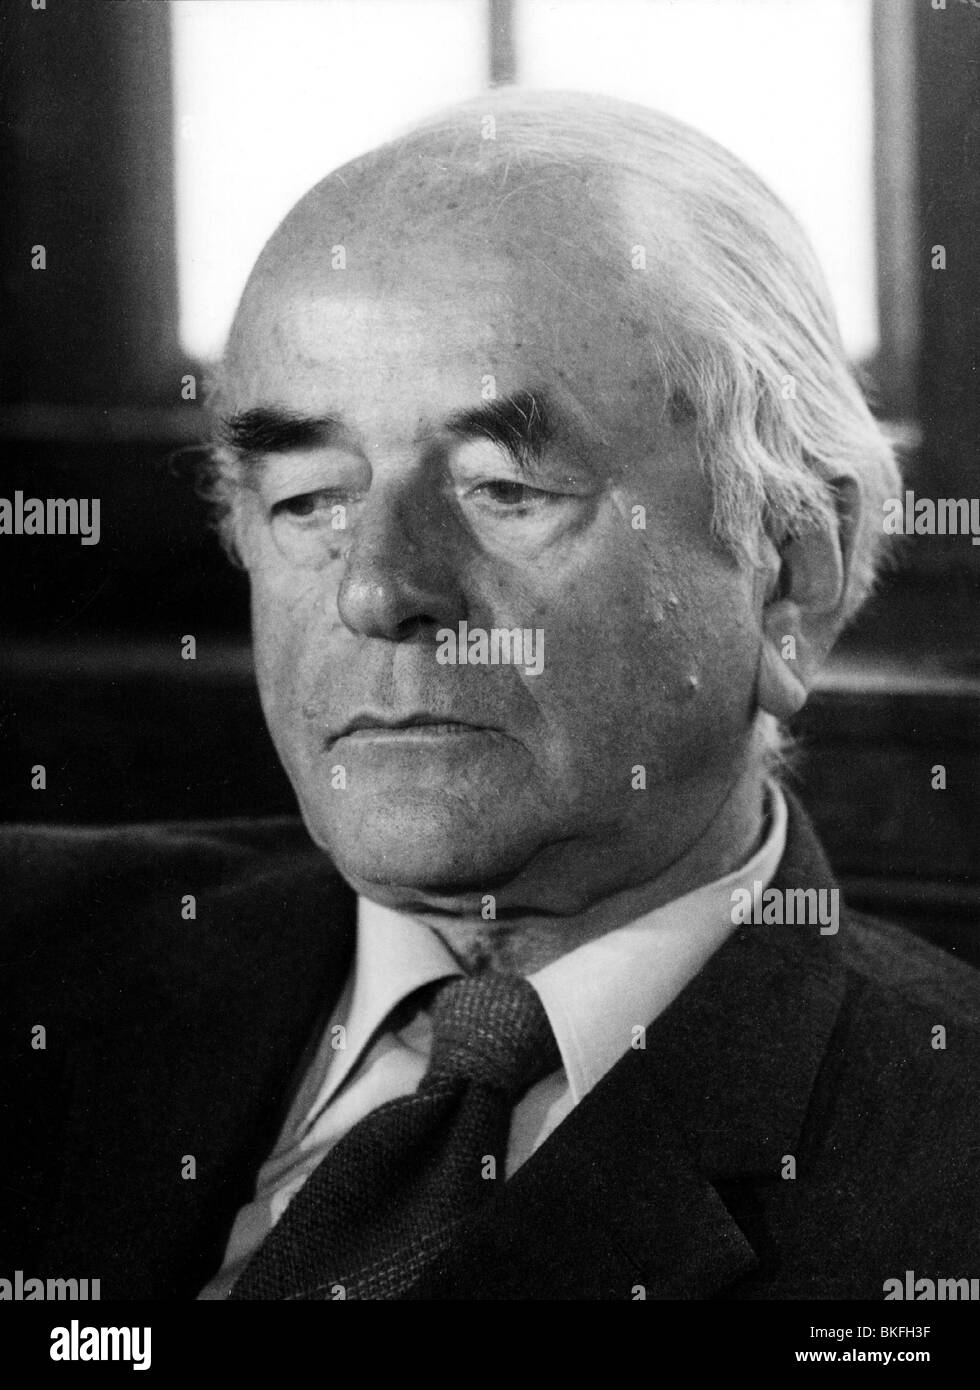 Speer, Albert, 19.3.1905 - 1.9.1981, German architect, politician (NSDAP), Minister of Armaments and War Production in Nazi Germany 1942 - 1945, portrait, 1970s, , Stock Photo